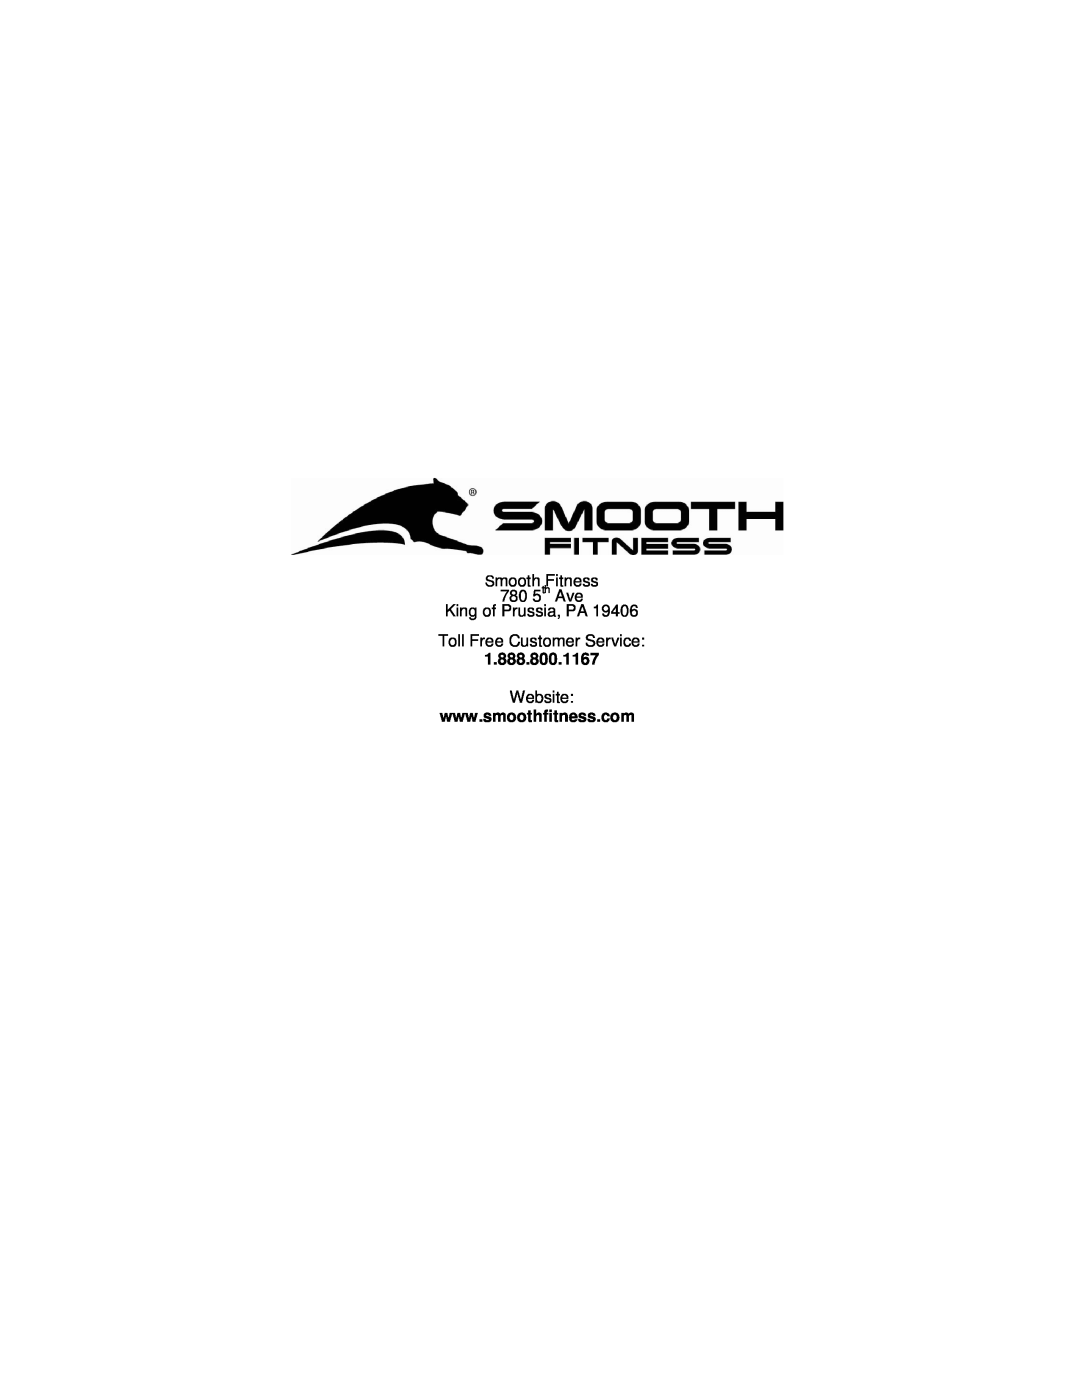 Smooth Fitness DMT X2 Smooth Fitness 780 5th Ave King of Prussia, PA, Toll Free Customer Service, 1.888.800.1167, Website 